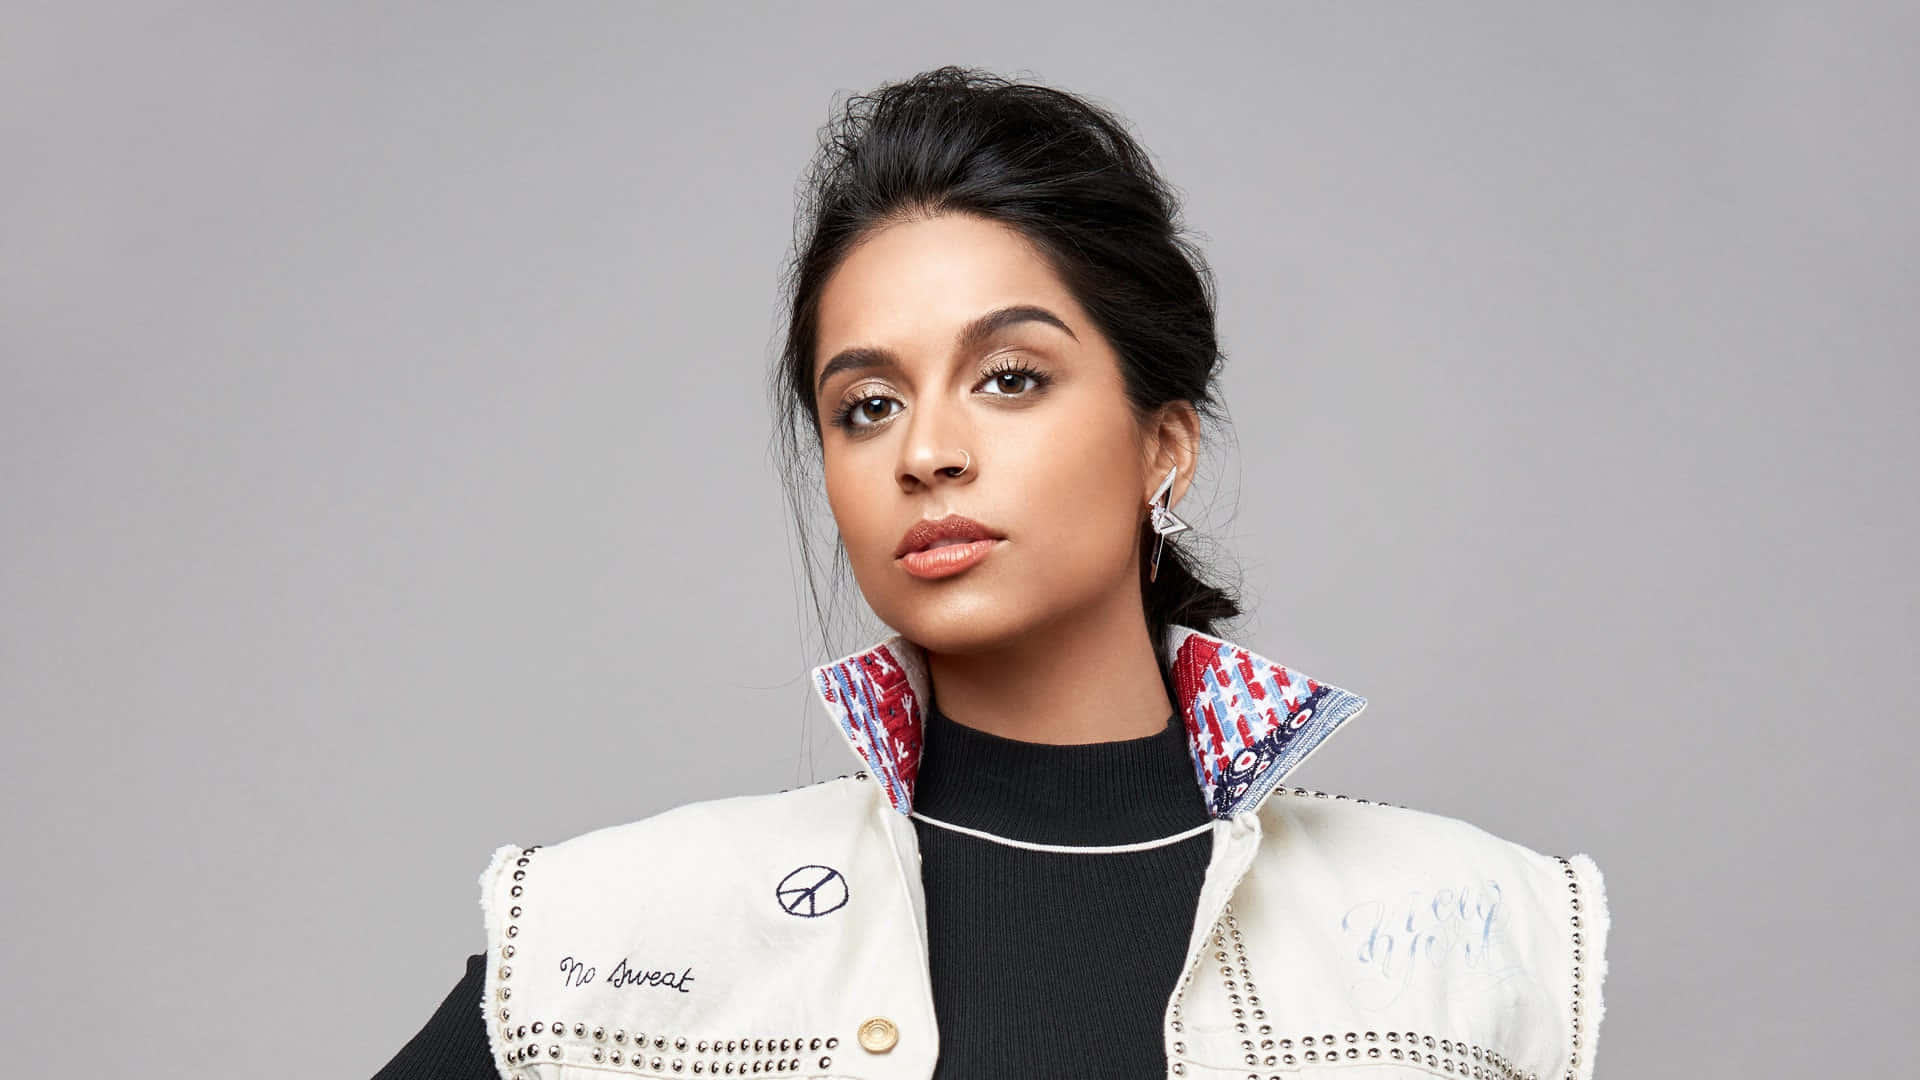 Captivating Lilly Singh in Elegant Traditional Indian Attire Wallpaper